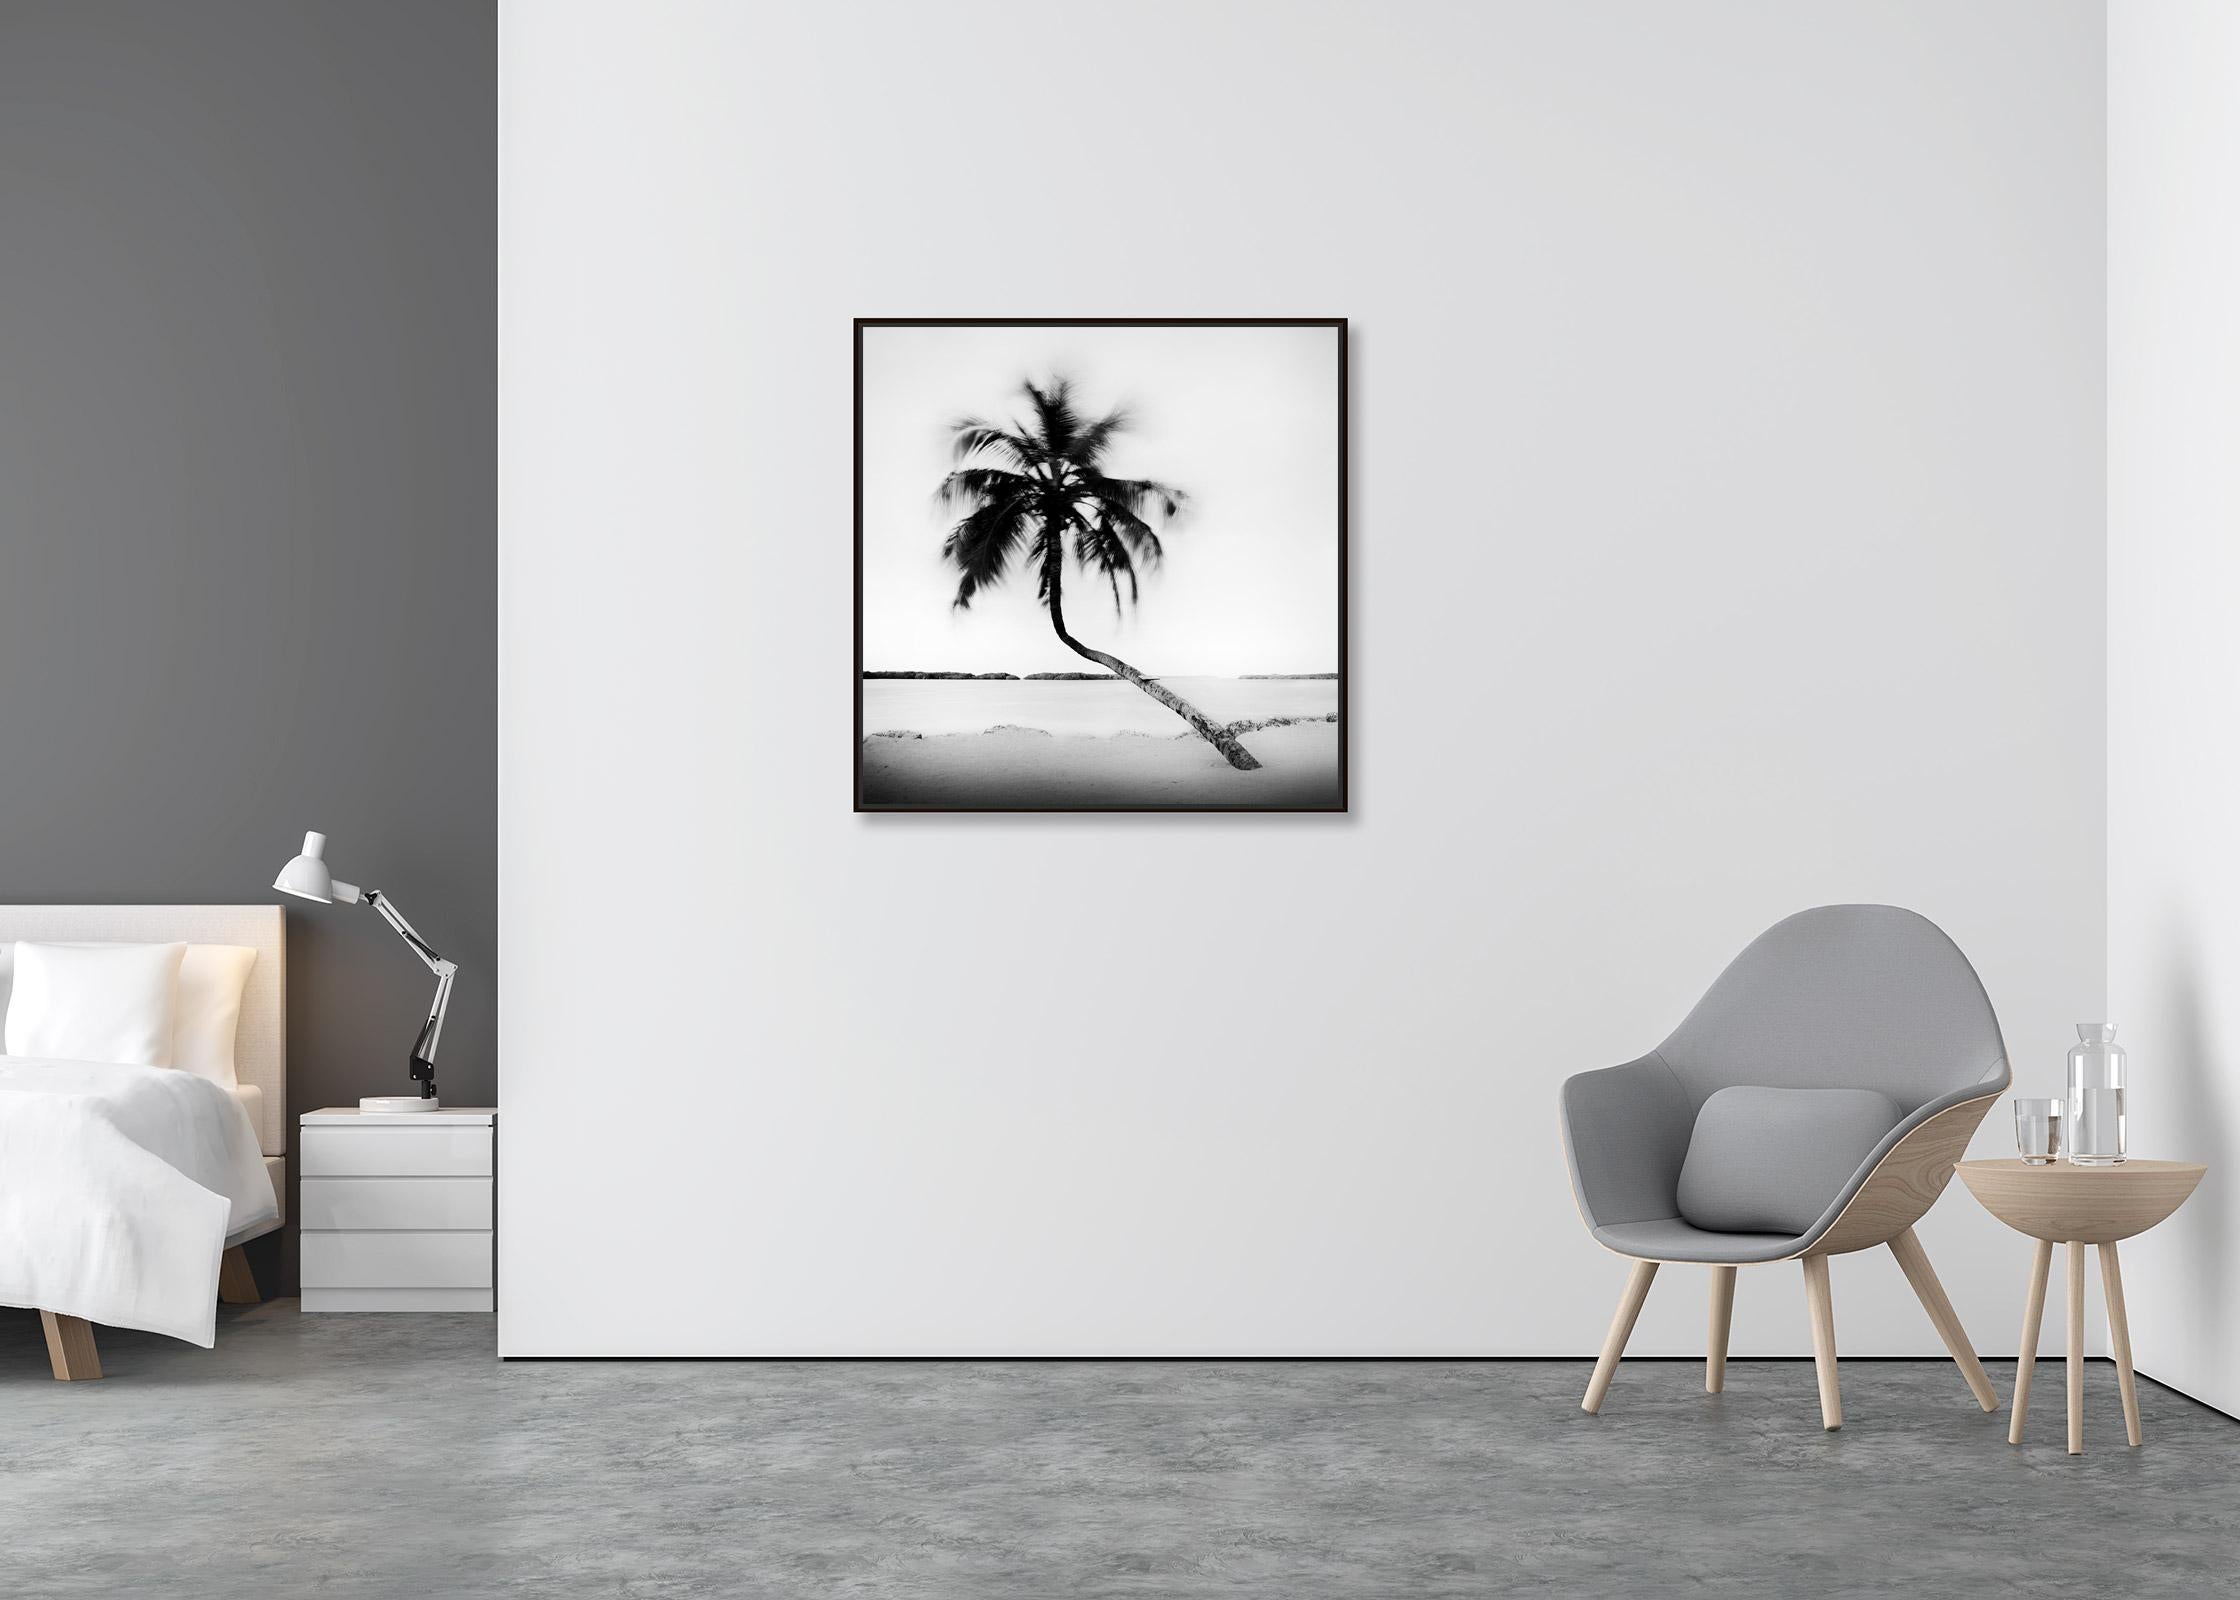 Bent Palm, Beach, Florida, USA, black and white fine art photography, landscape - Contemporary Photograph by Gerald Berghammer, Ina Forstinger